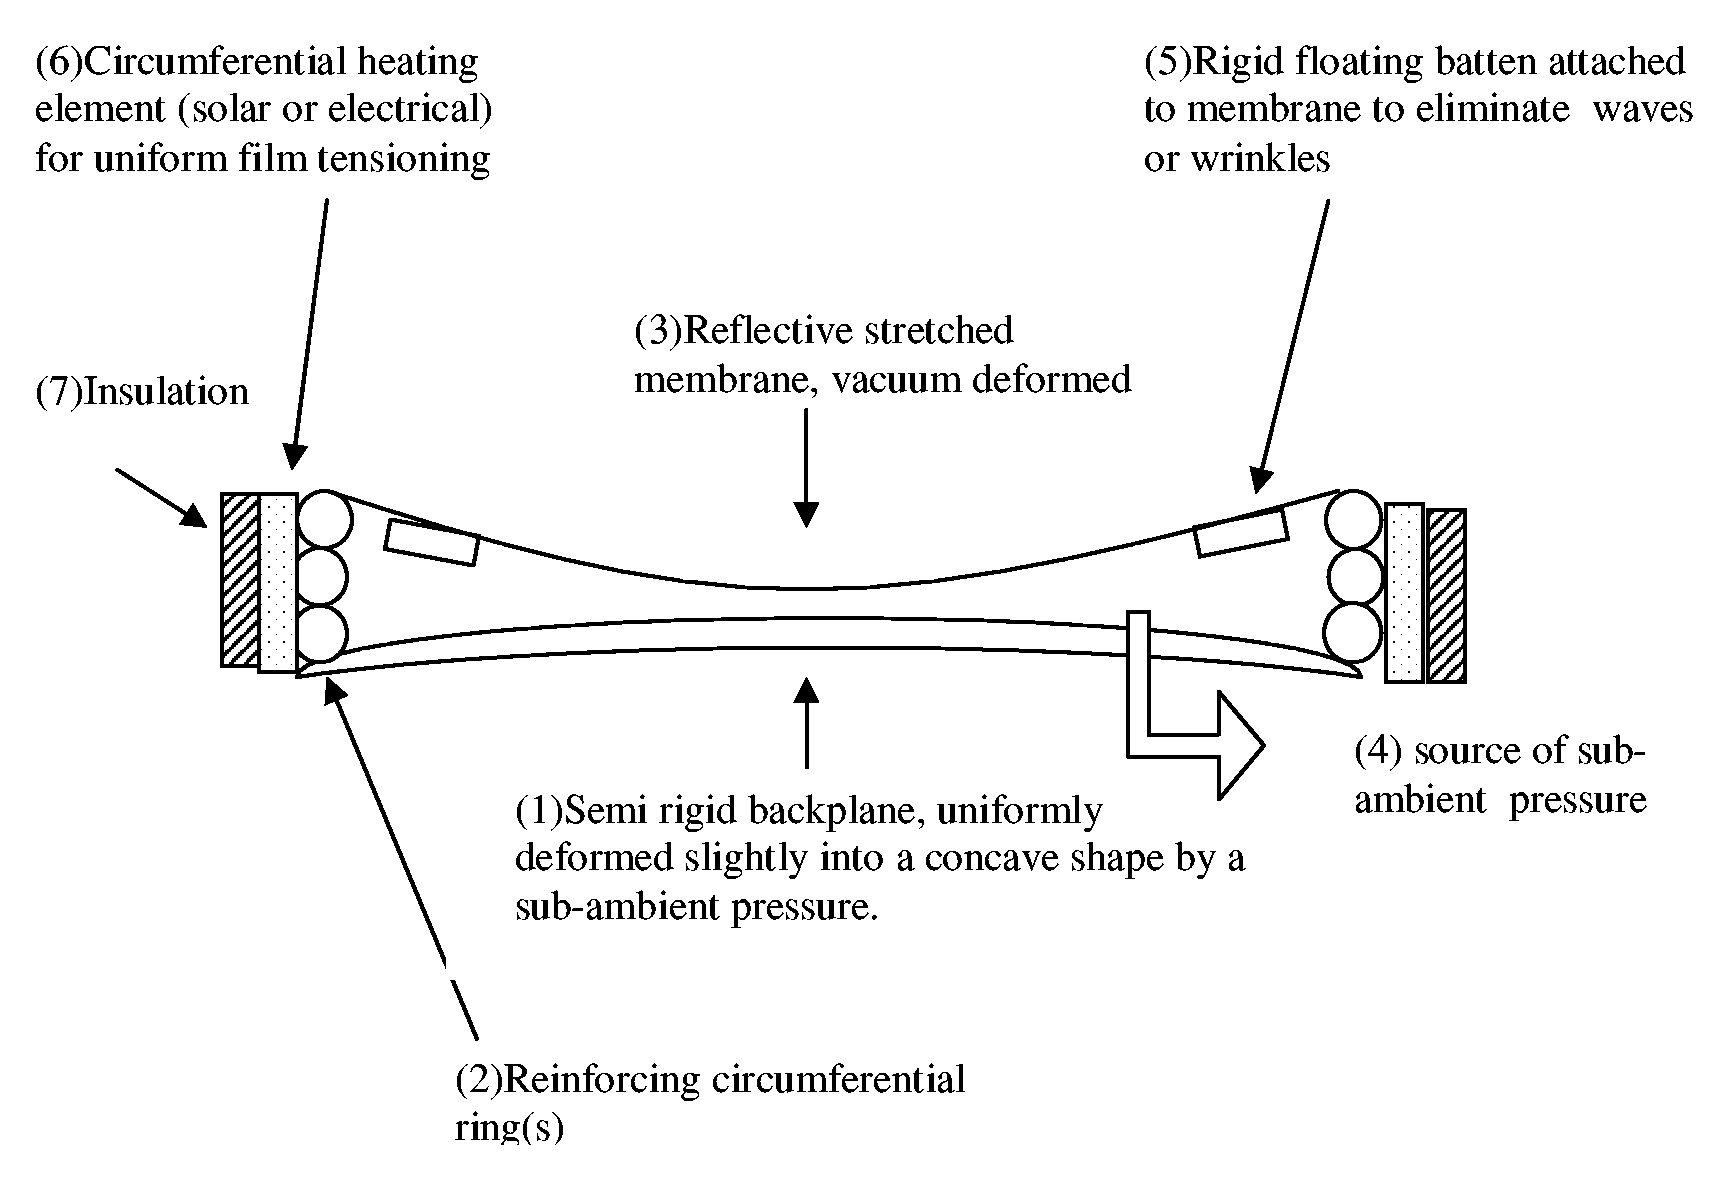 Stretched membrane device